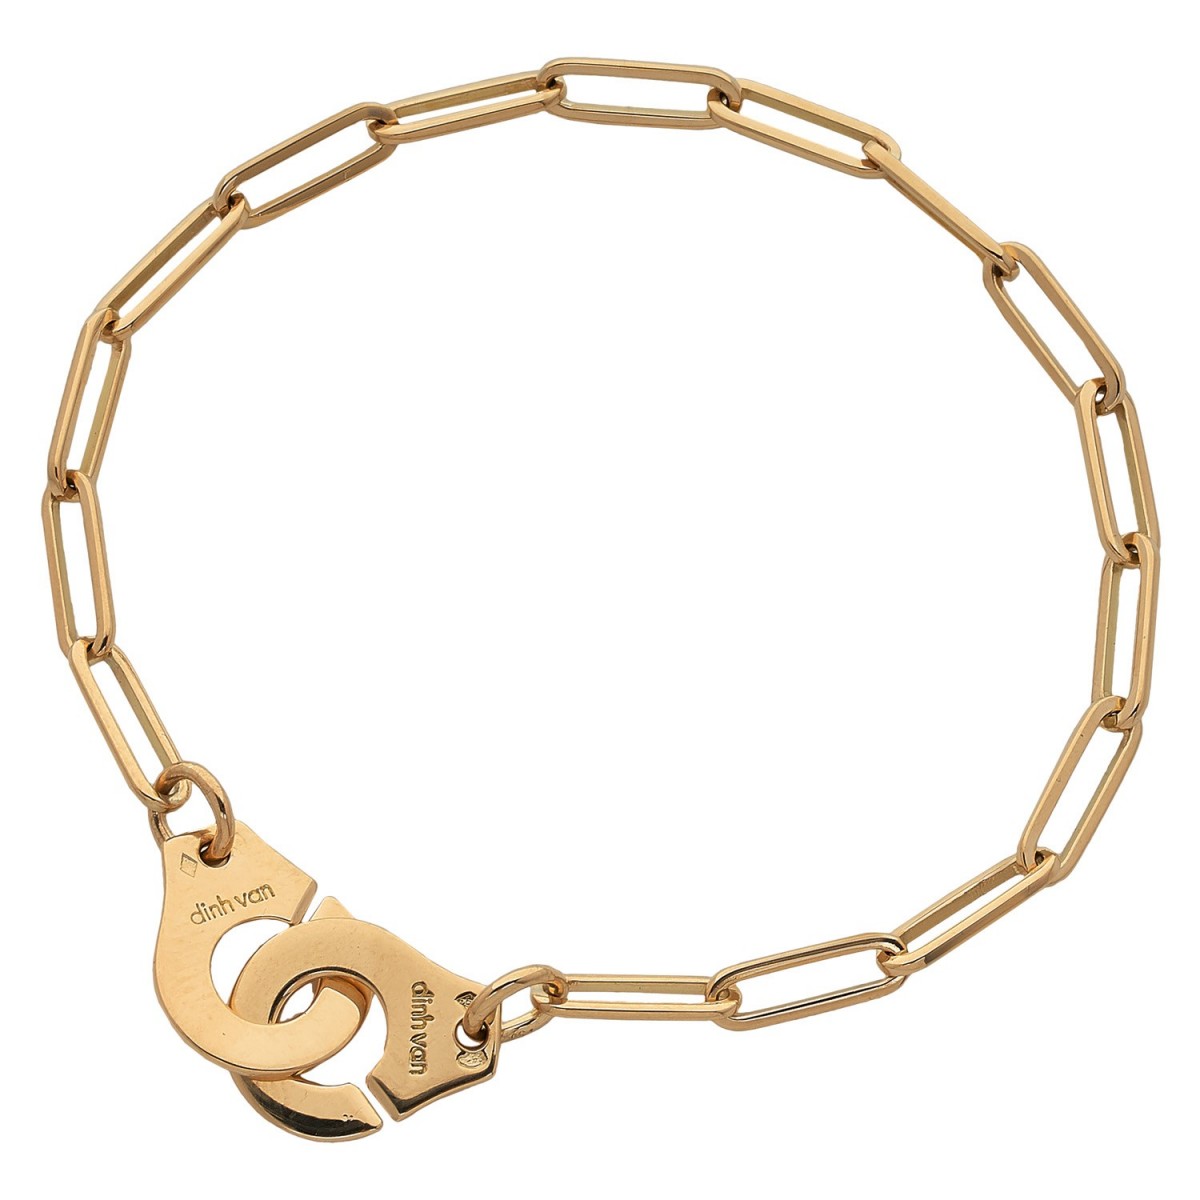 Menottes dinh van R12 bracelet in yellow gold and diamonds on cord | LEPAGE